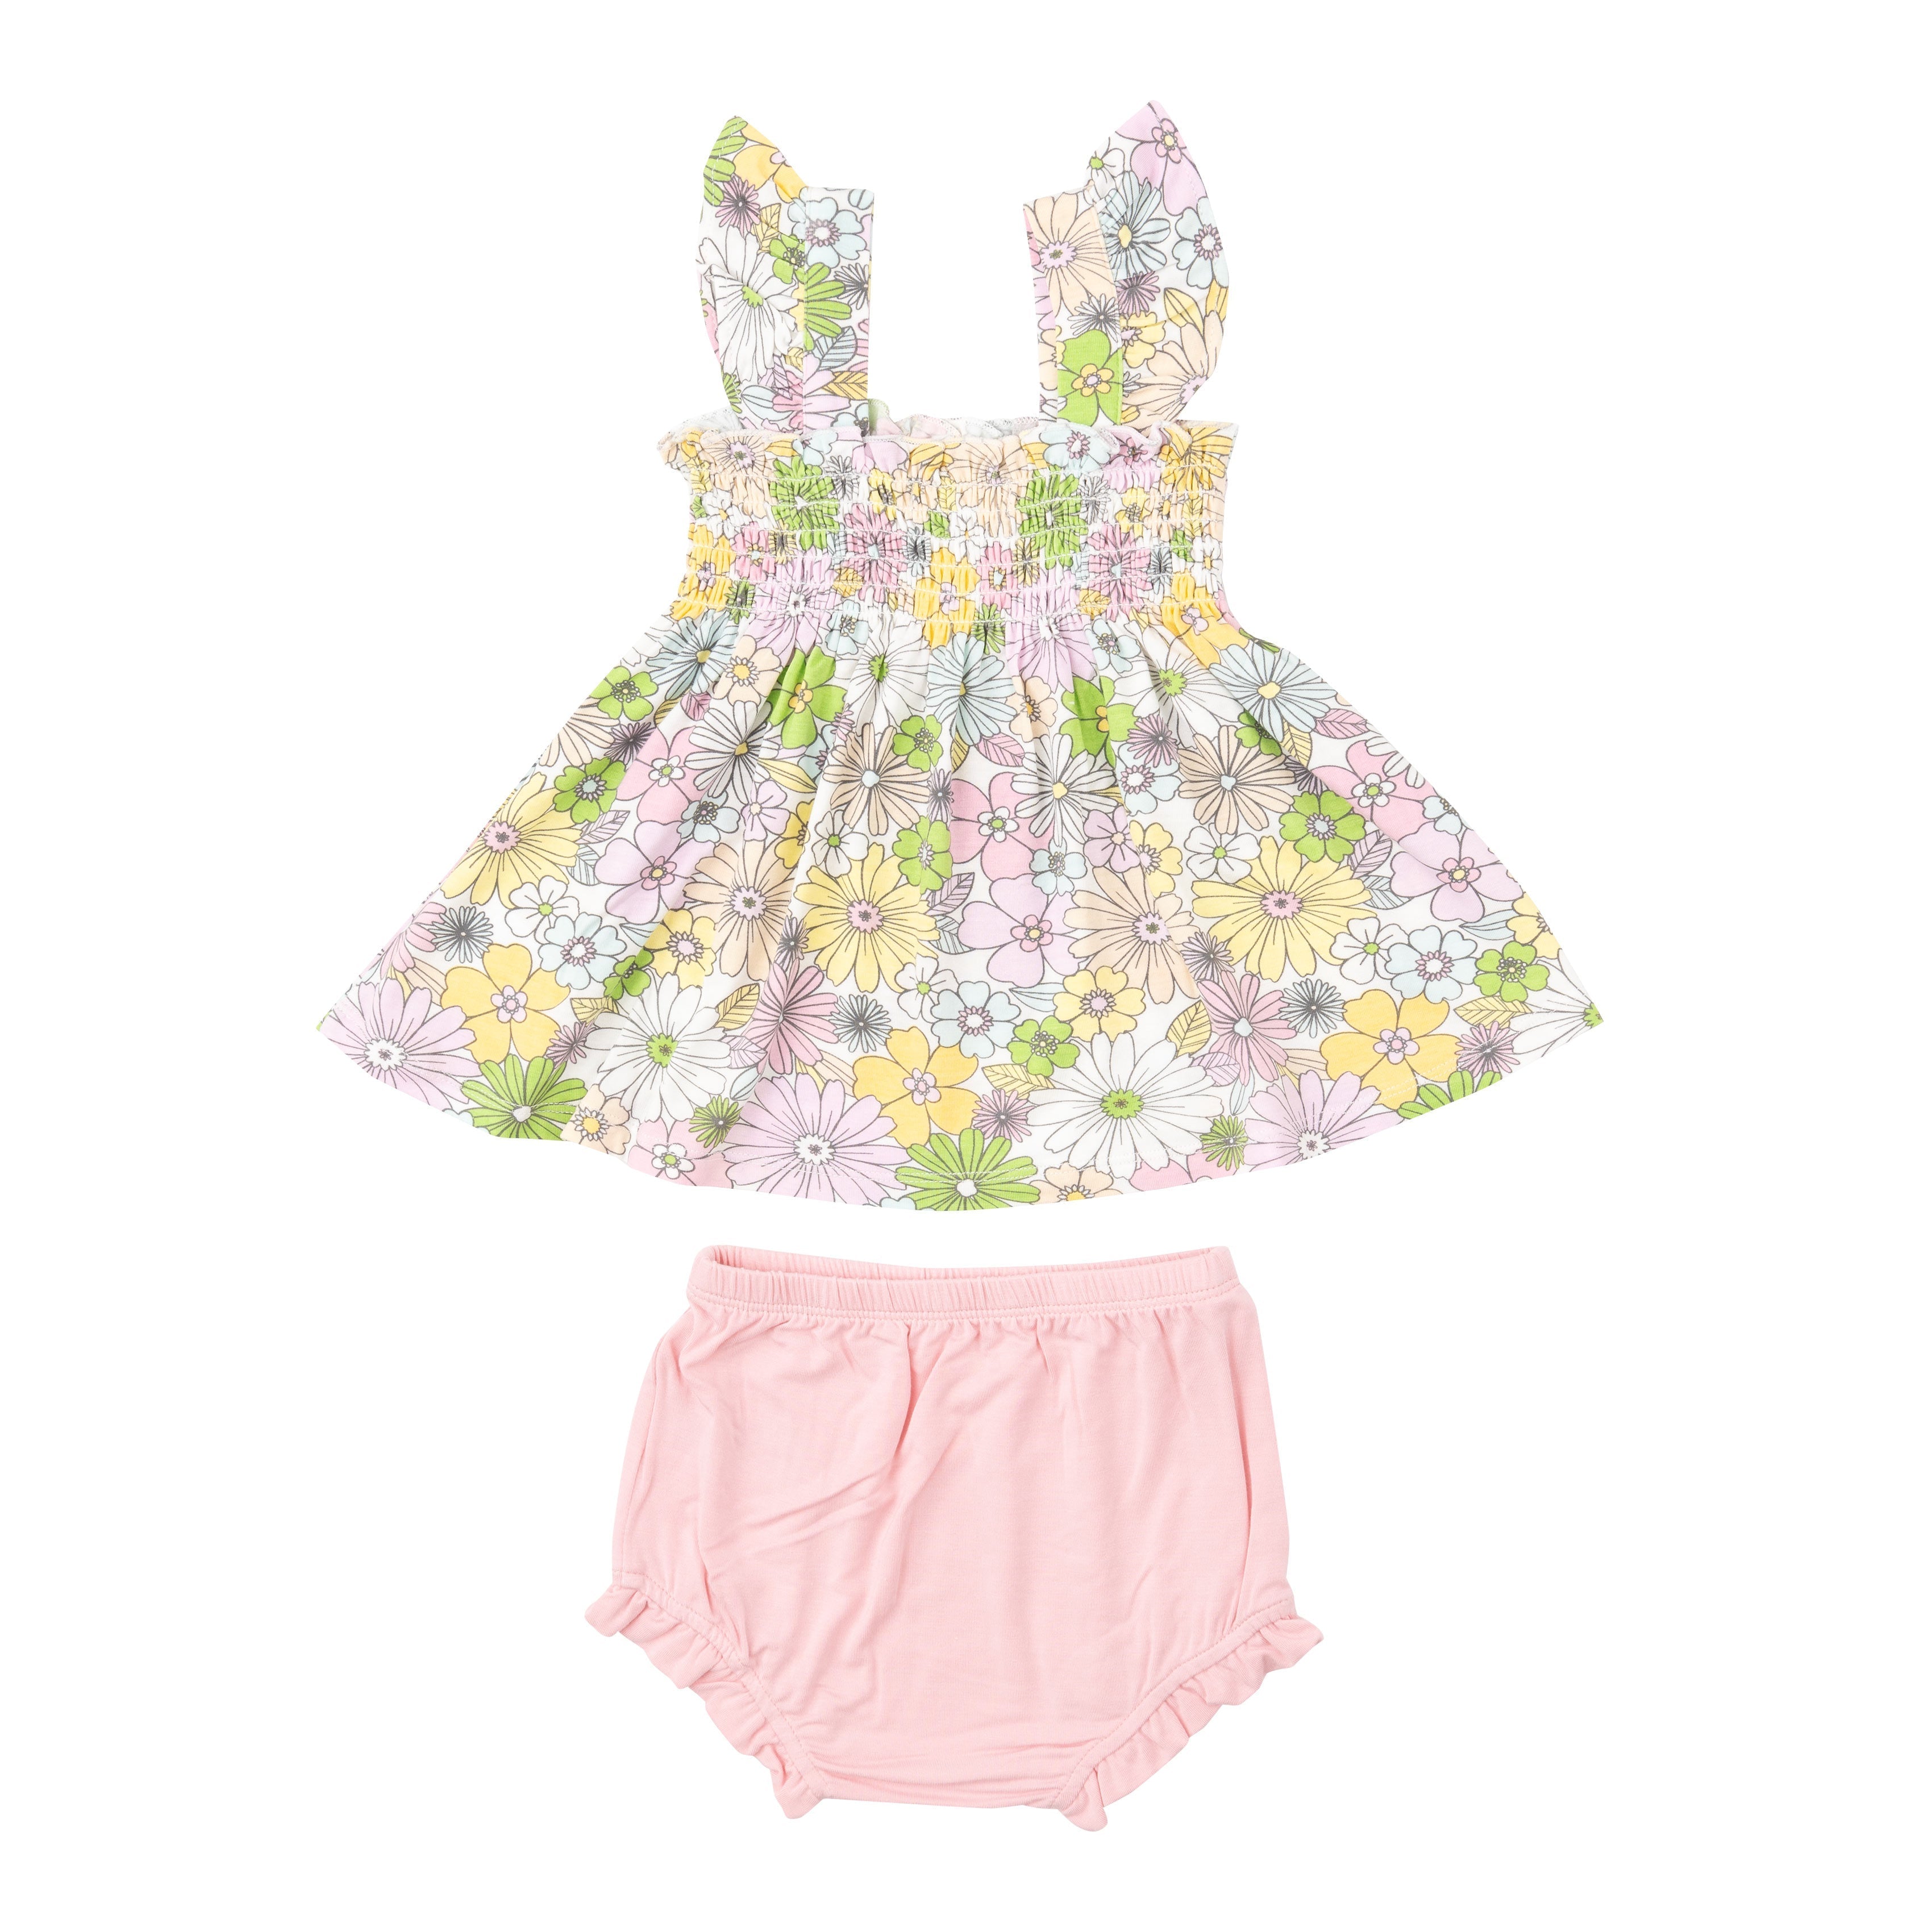 Ruffle Strap Smocked Top And Diaper Cover - Mixed Retro Floral